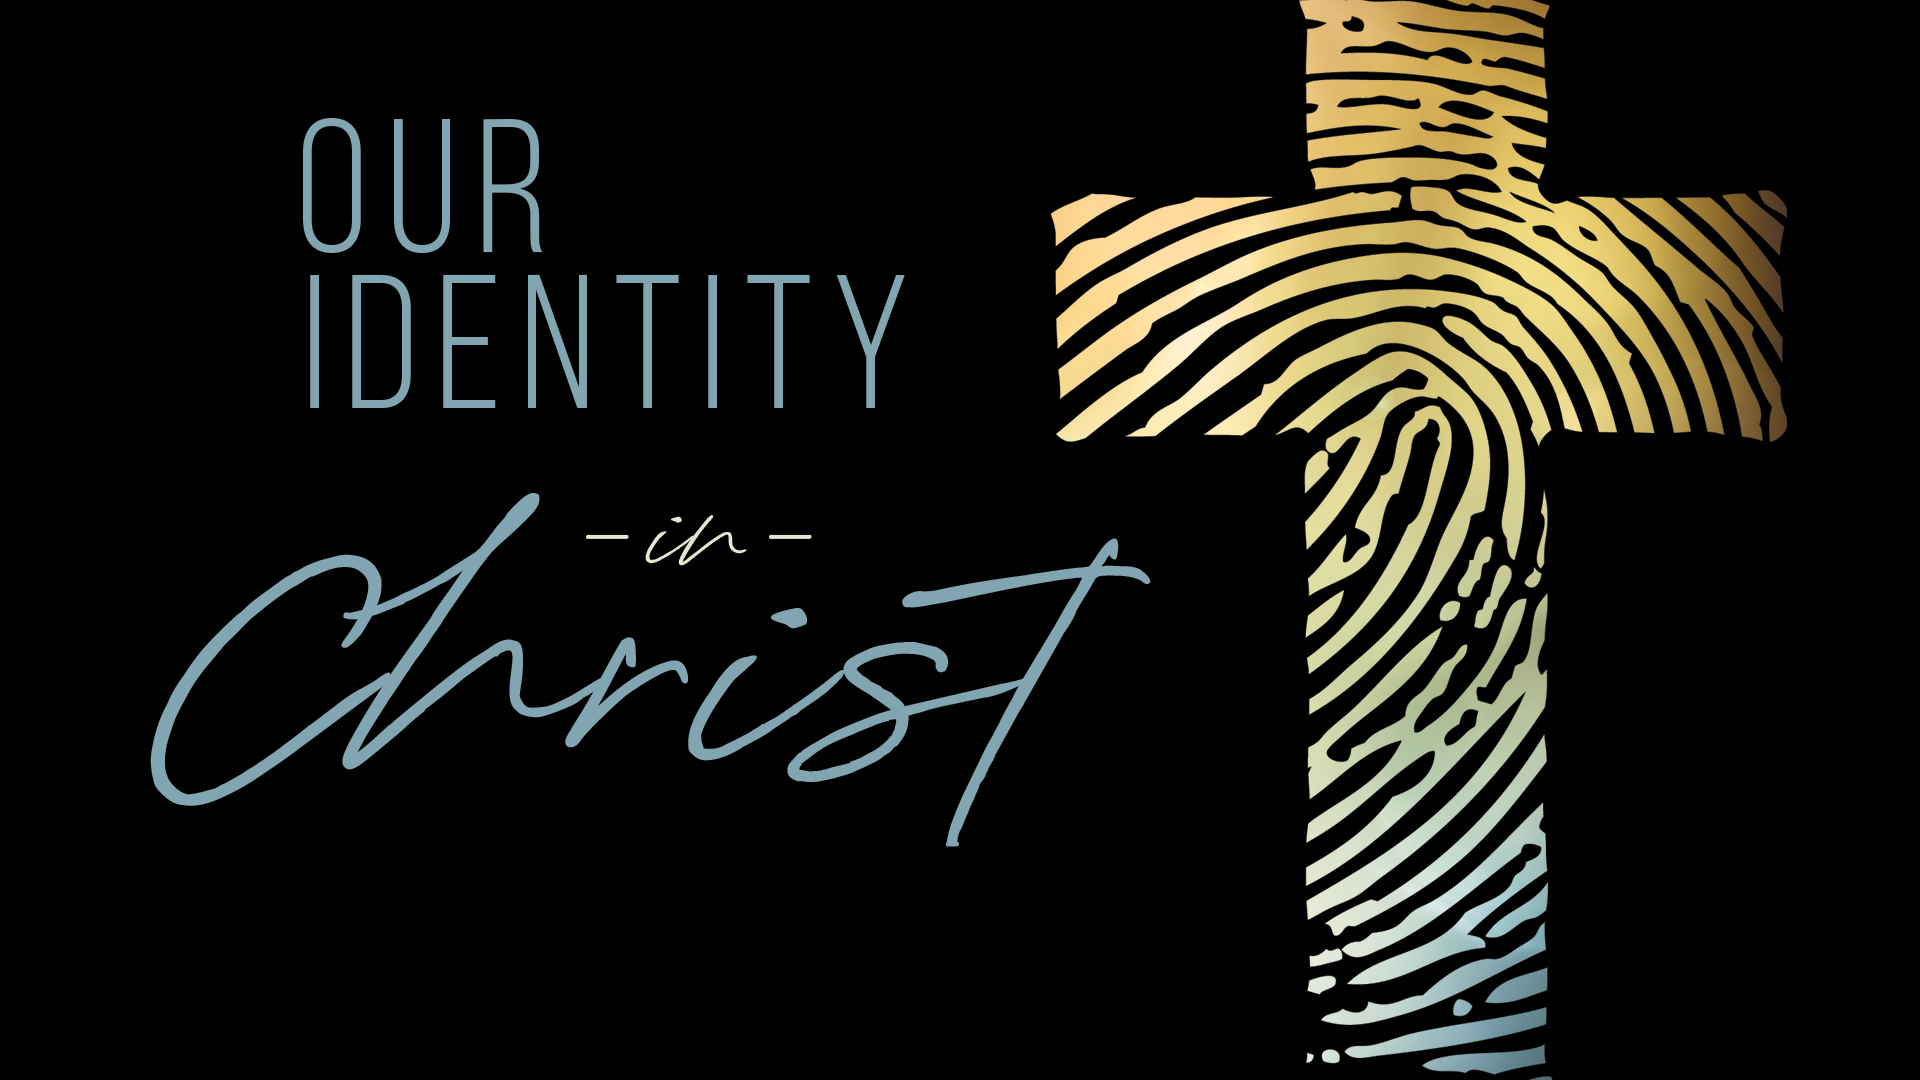 Our Identity in Christ: The Lord is My Shepherd